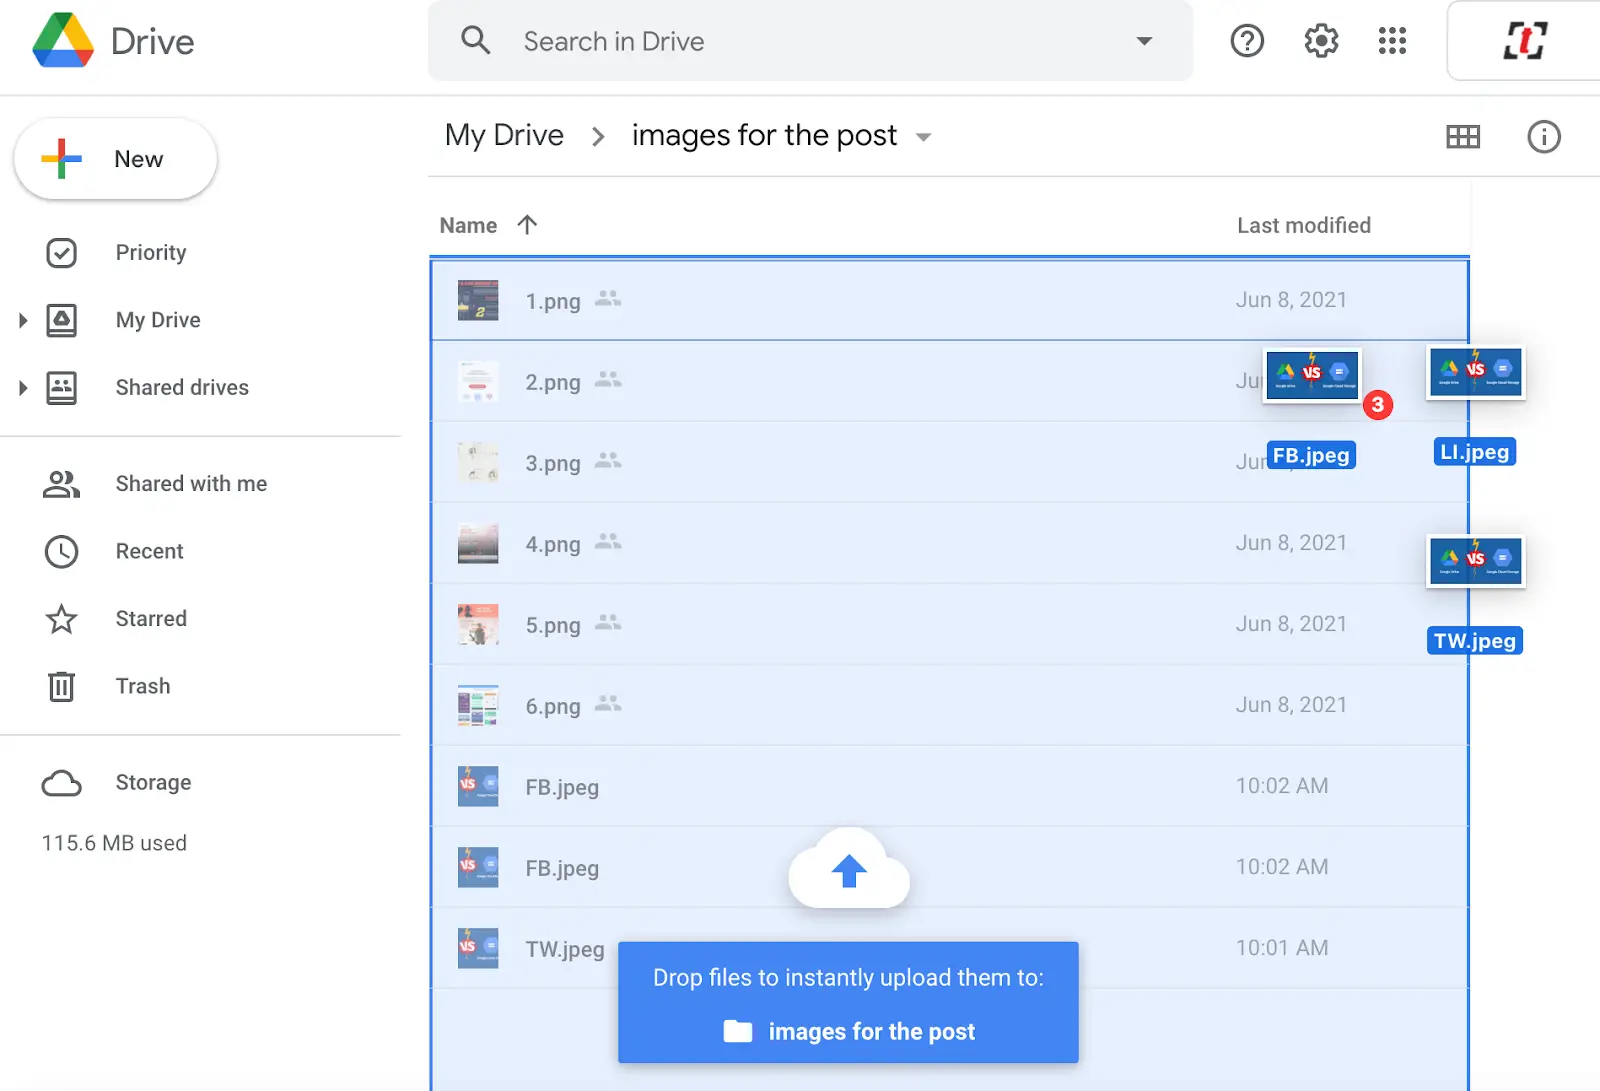 Drag-and-drop files from the folder or desktop to your Google Drive